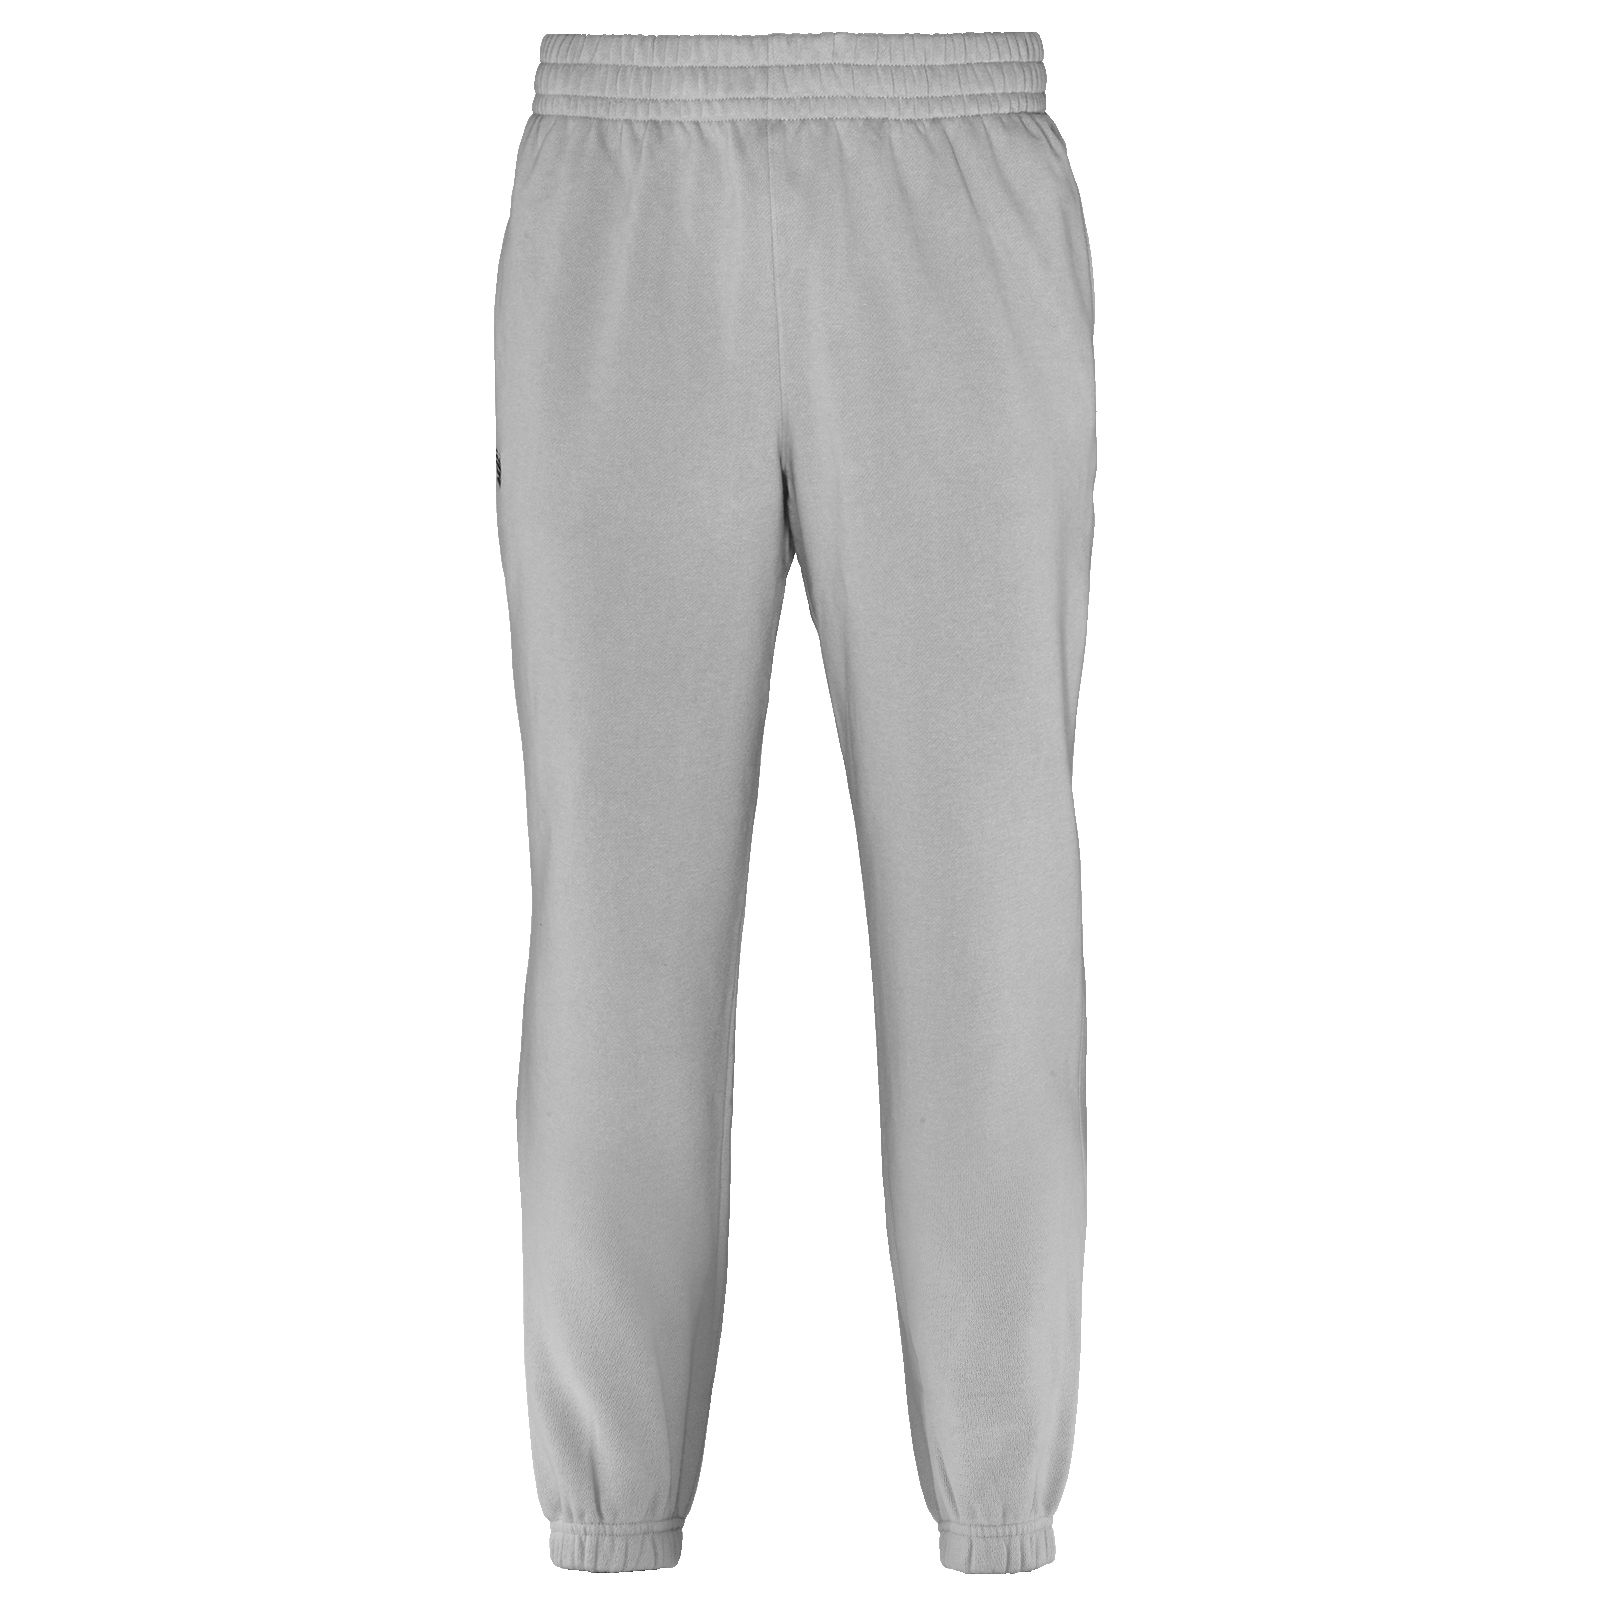 Youth Custom Perf Sweatpants, Alloy image number 0